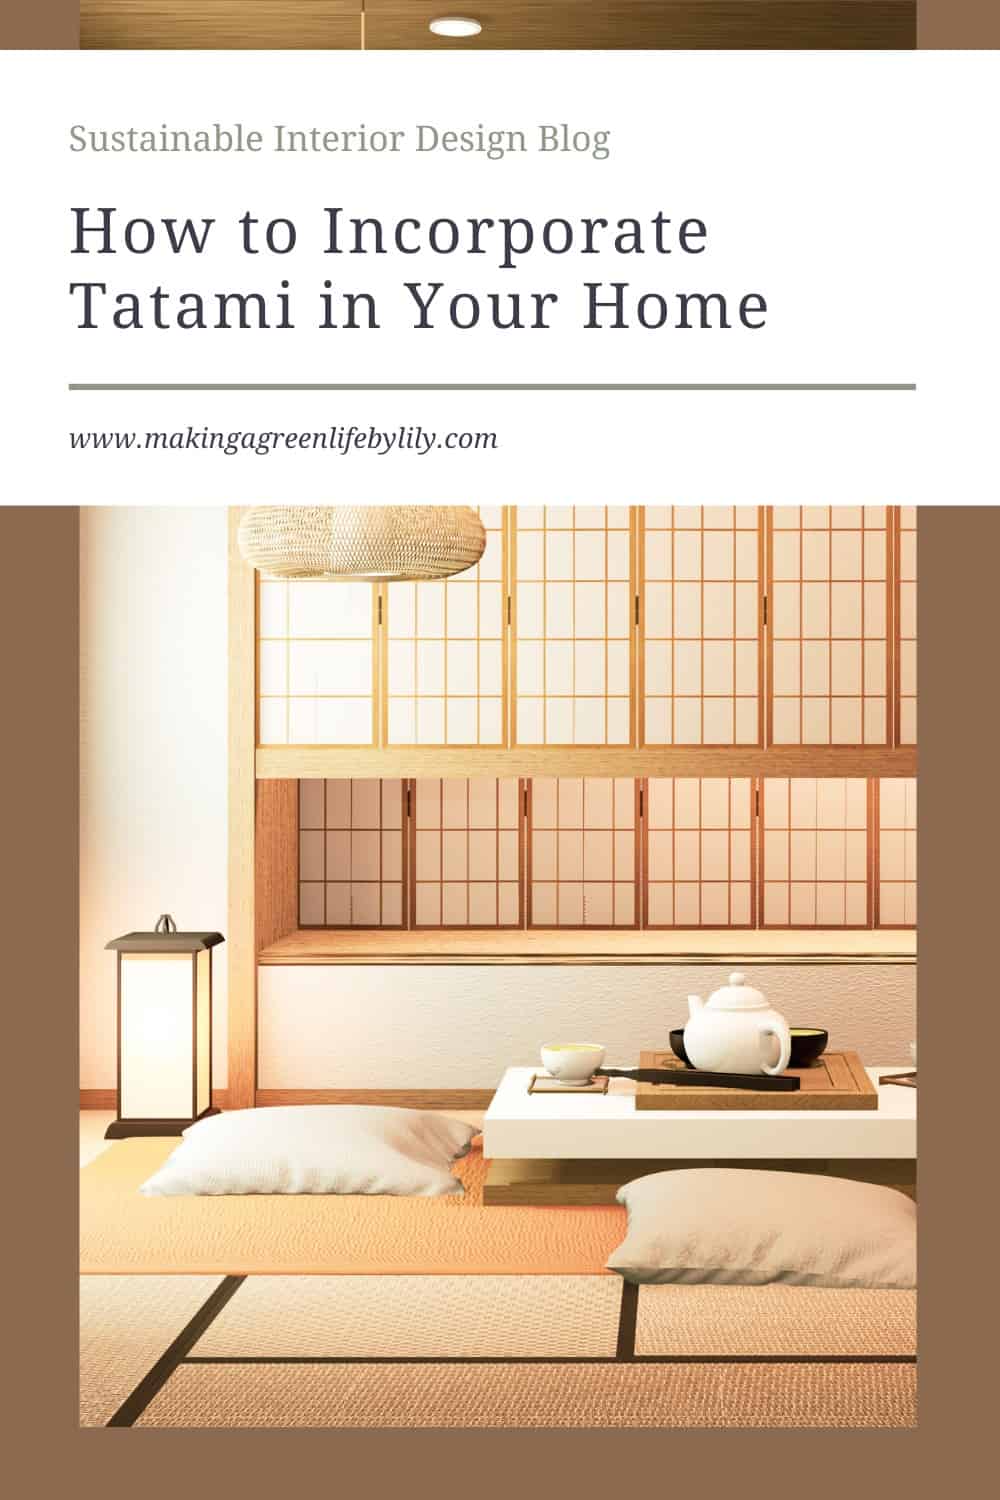 How to incorporate tatami in your home